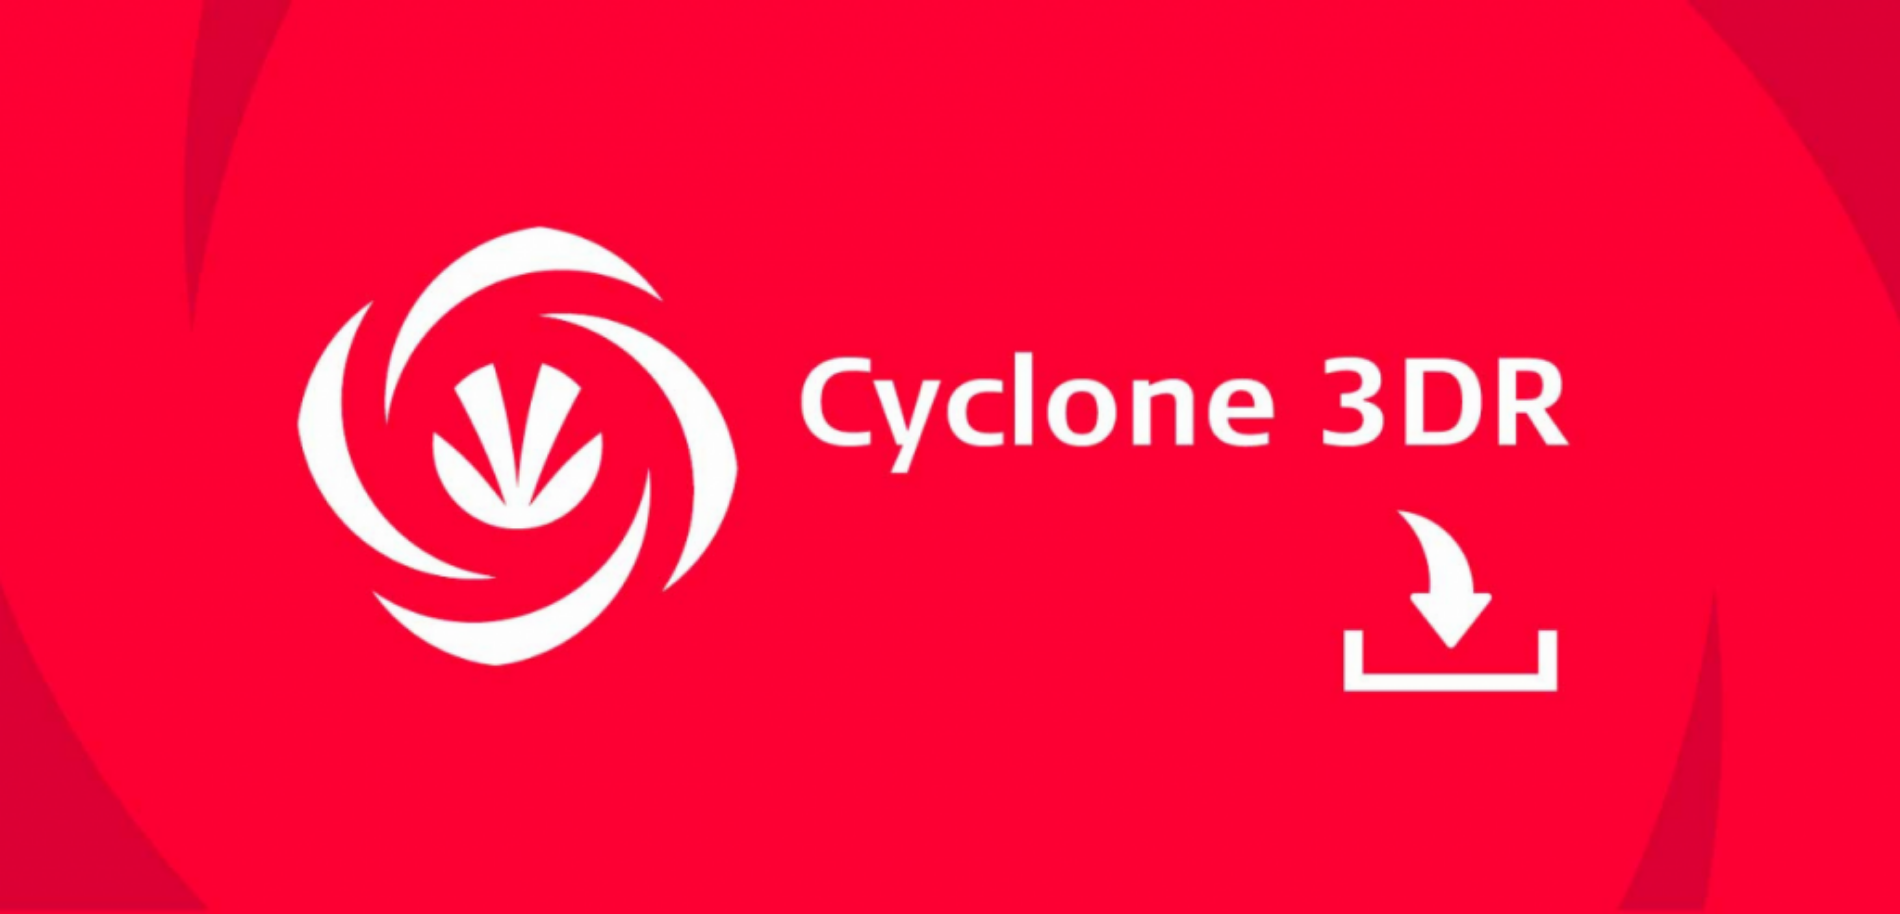 Cyclone 3DR